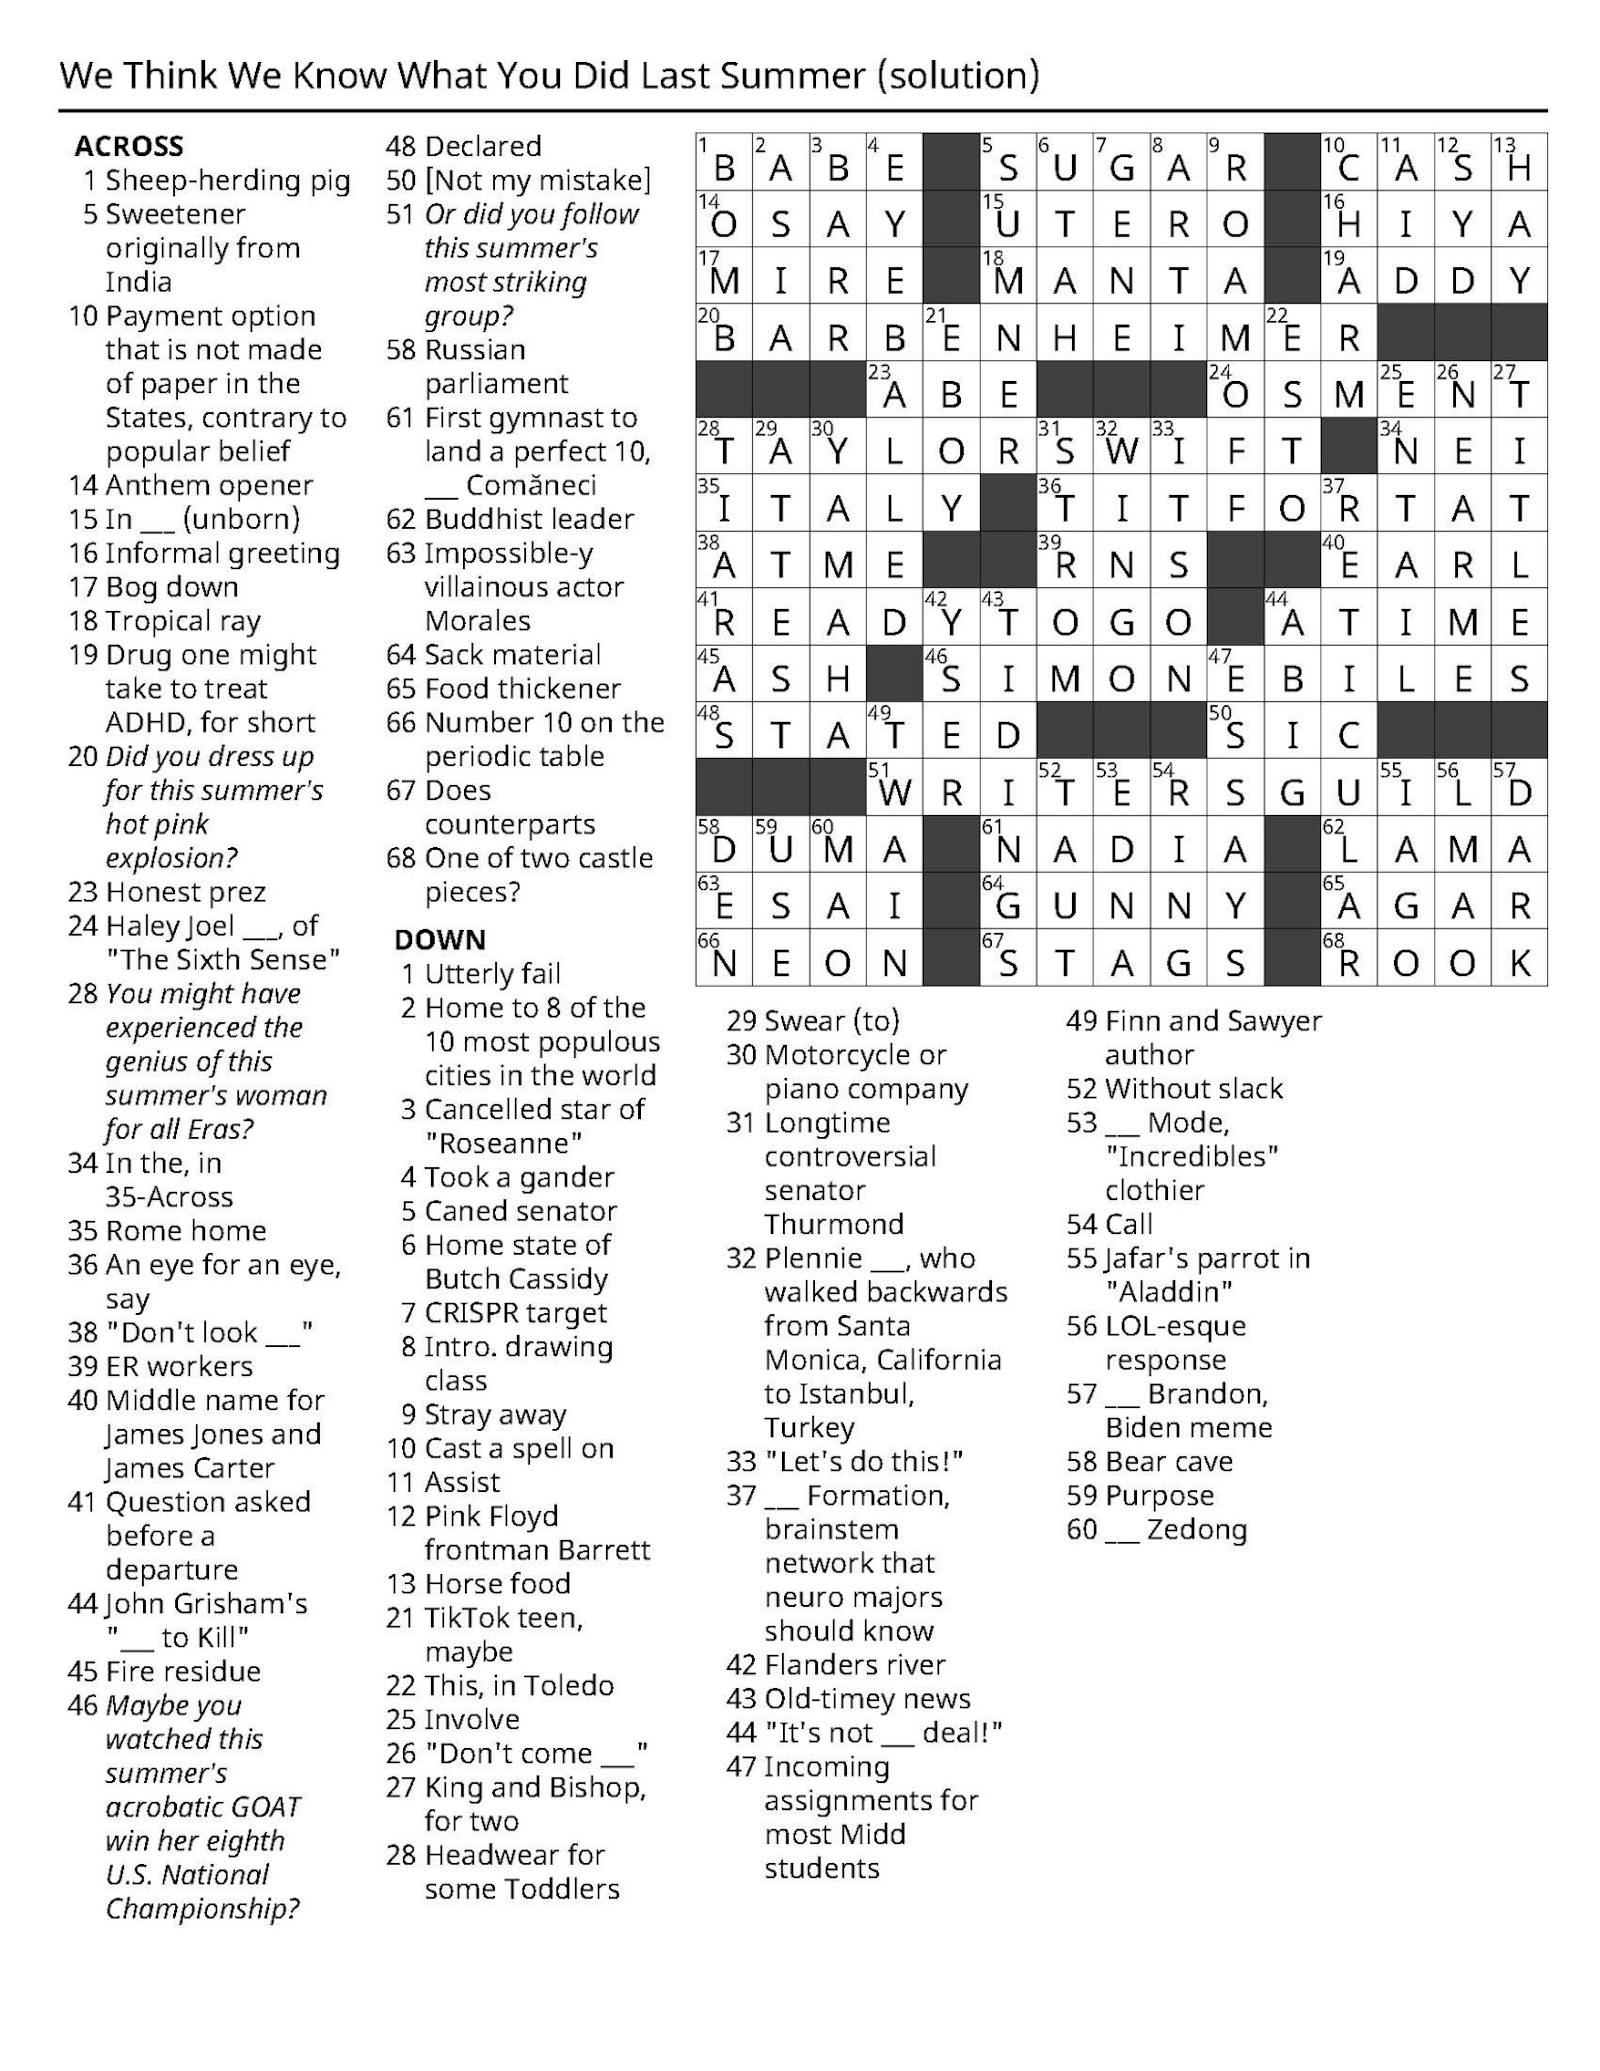 Crossword 09/14: Solutions The Middlebury Campus